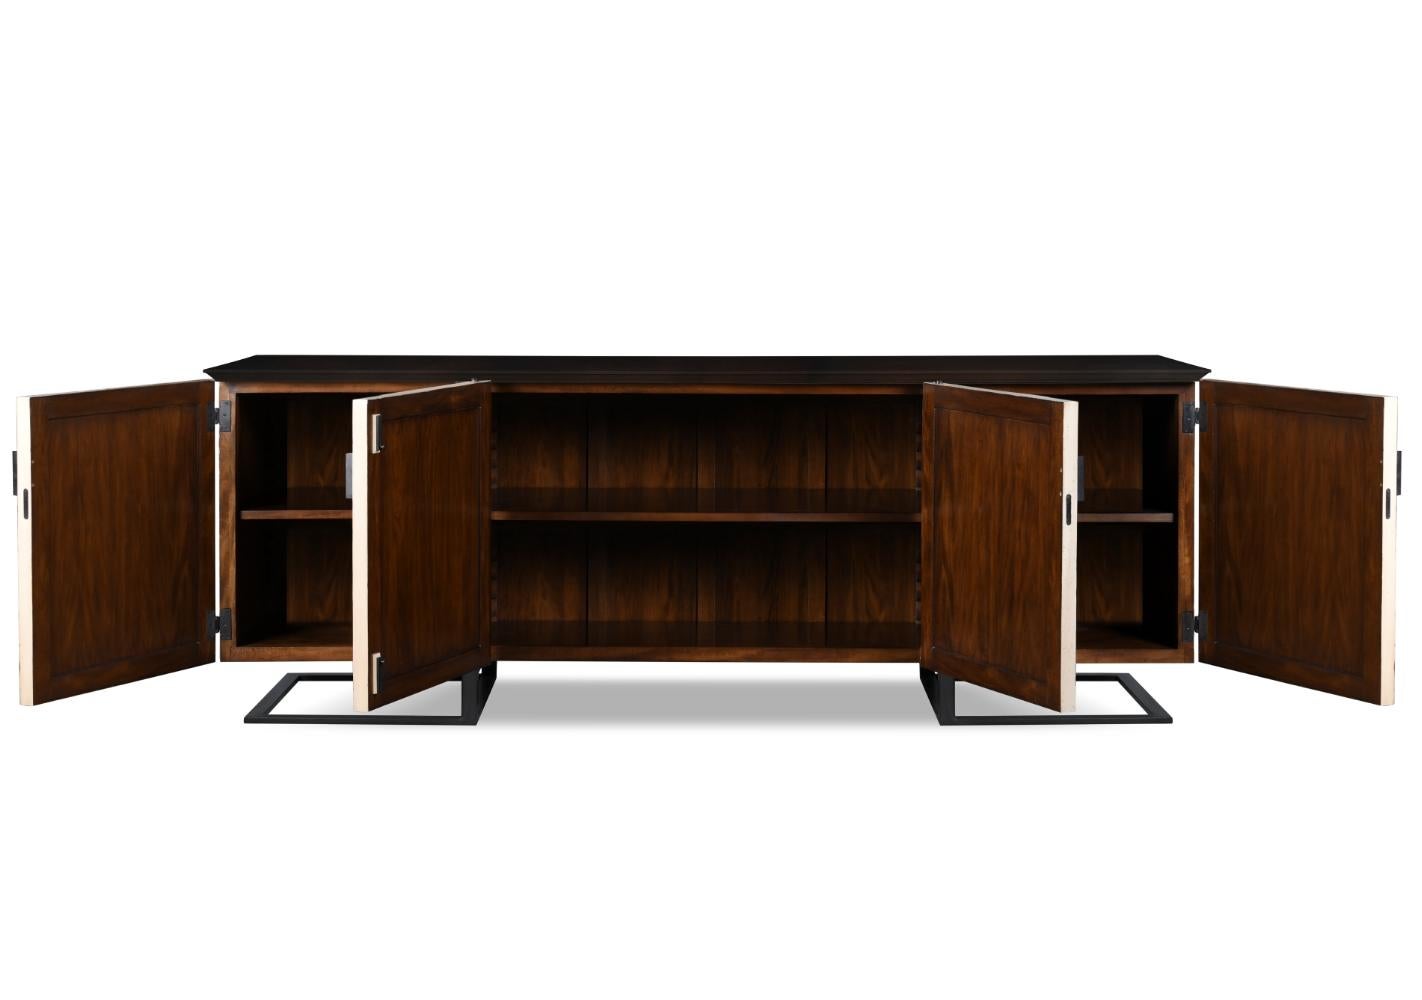 This piece is completely symmetrical with its four large doors decorated with wooden moldings that add texture to its front cover. The metal base holds up the wooden buffet, creating a harmonious contrast of both materials.